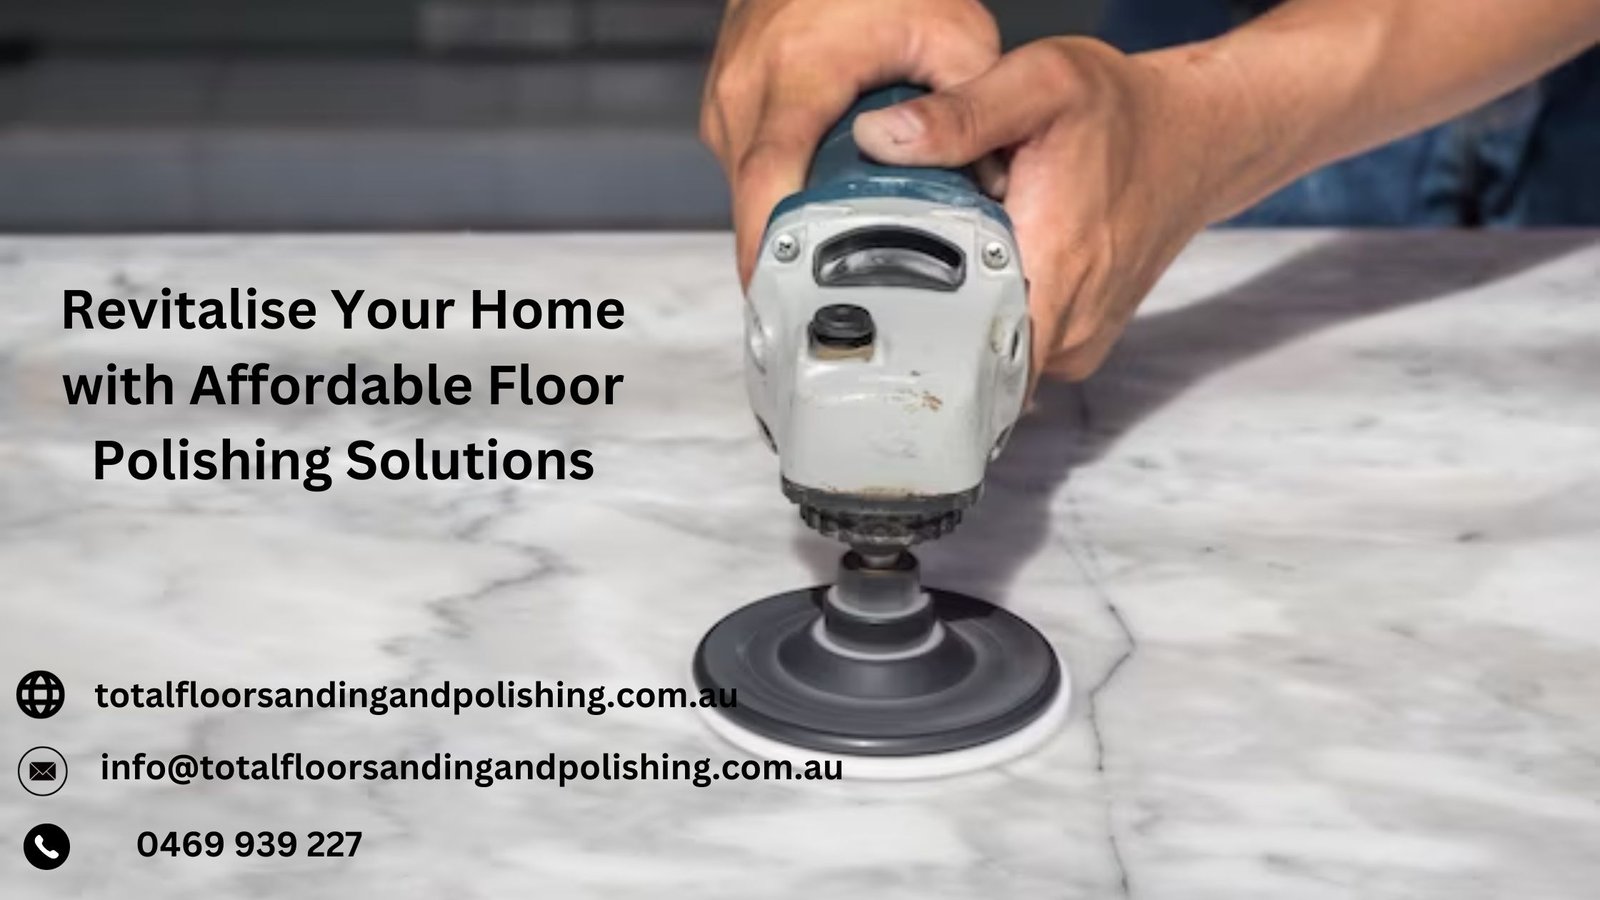 Revitalise Your Home with Affordable Floor Polishing Solutions